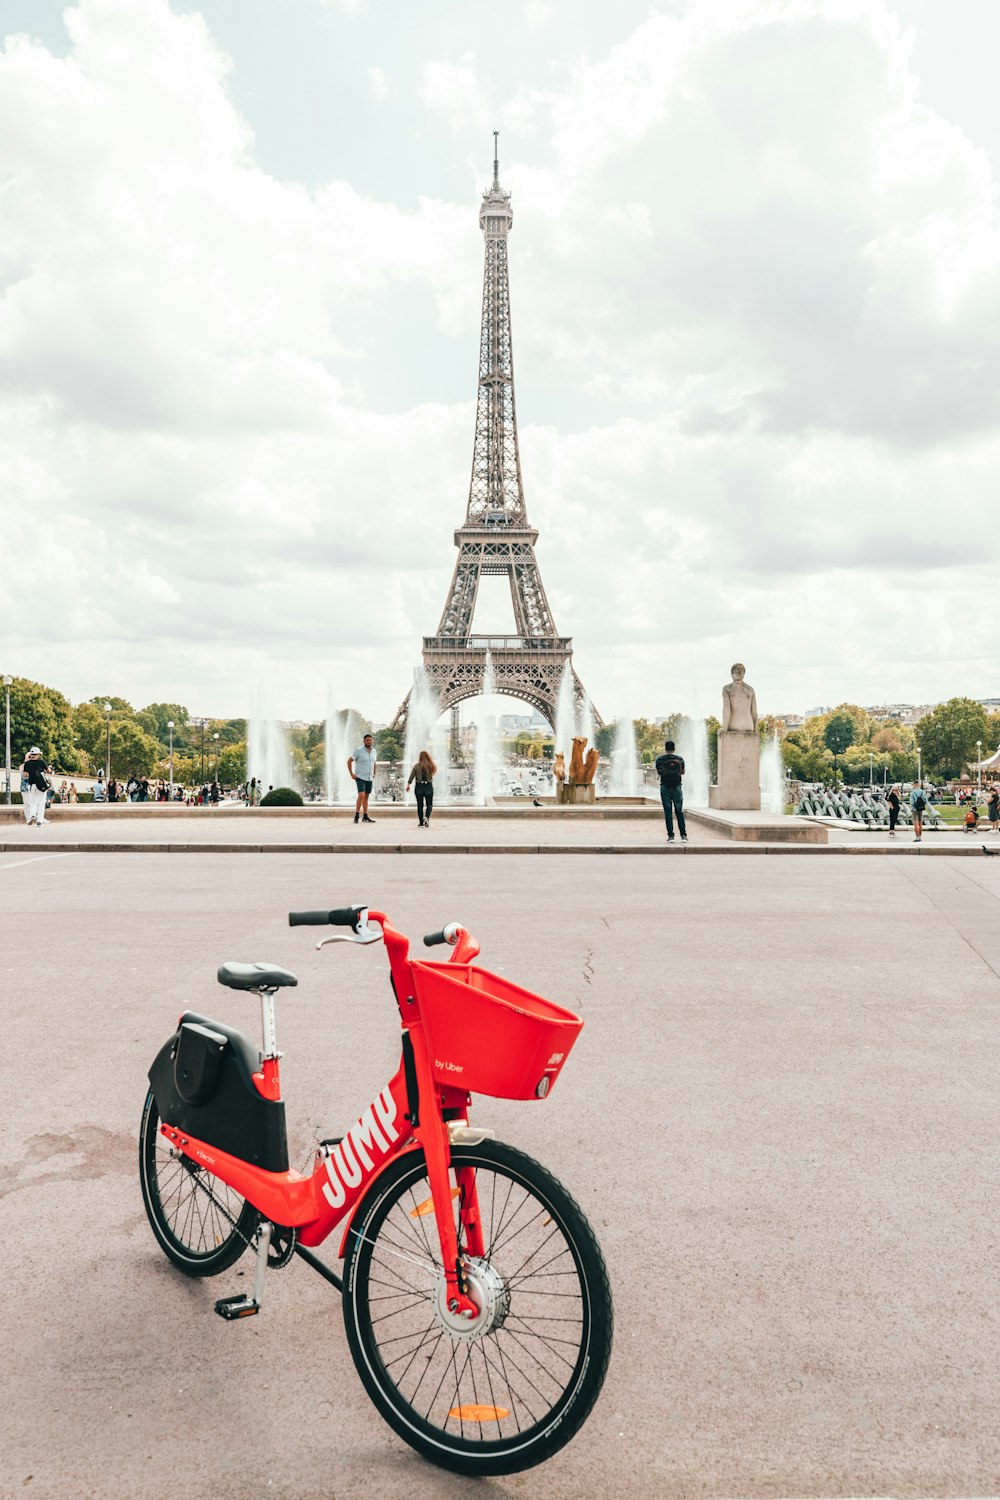 bicycle parked in an open area with Eiffel Tower in the background